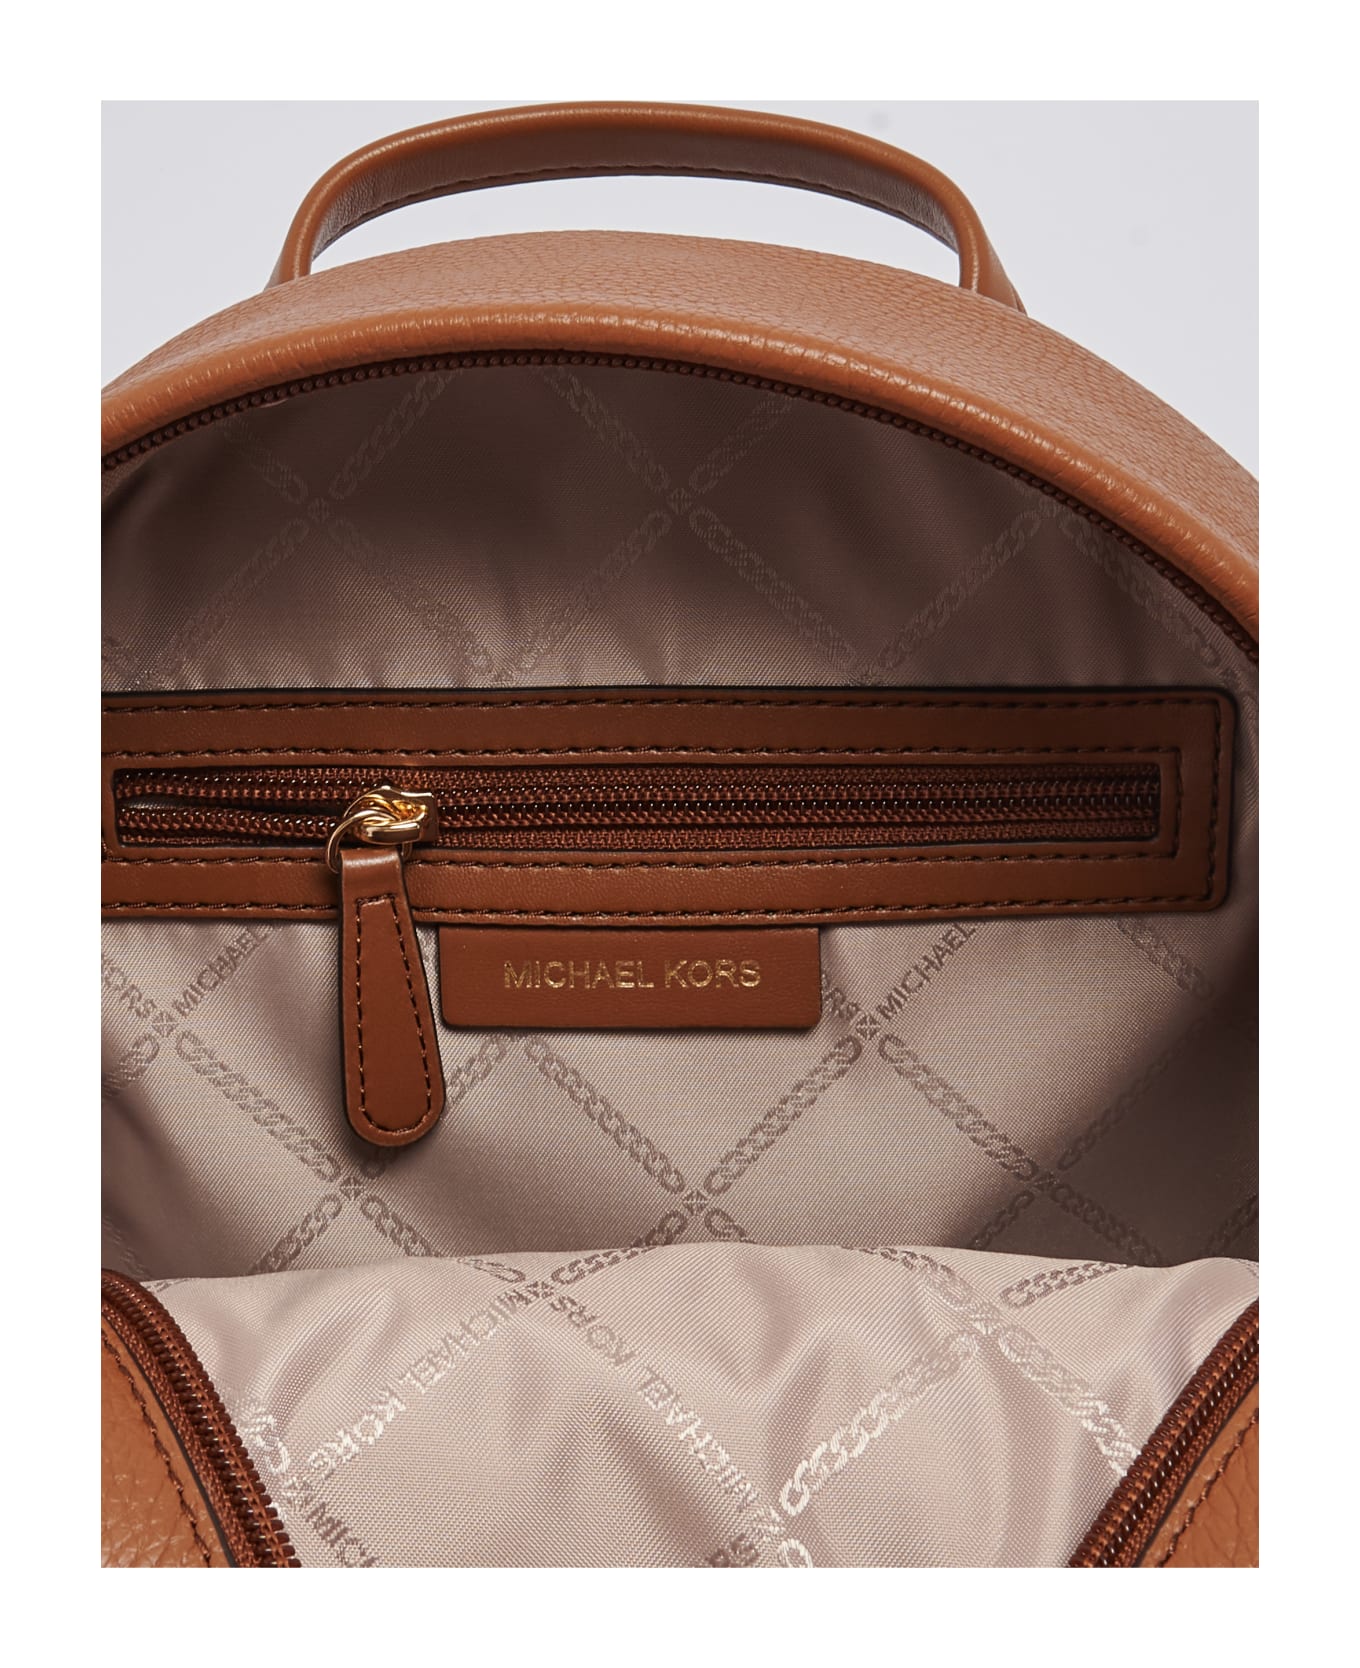 Michael Kors Brown Leather Backpack - CUOIO バックパック